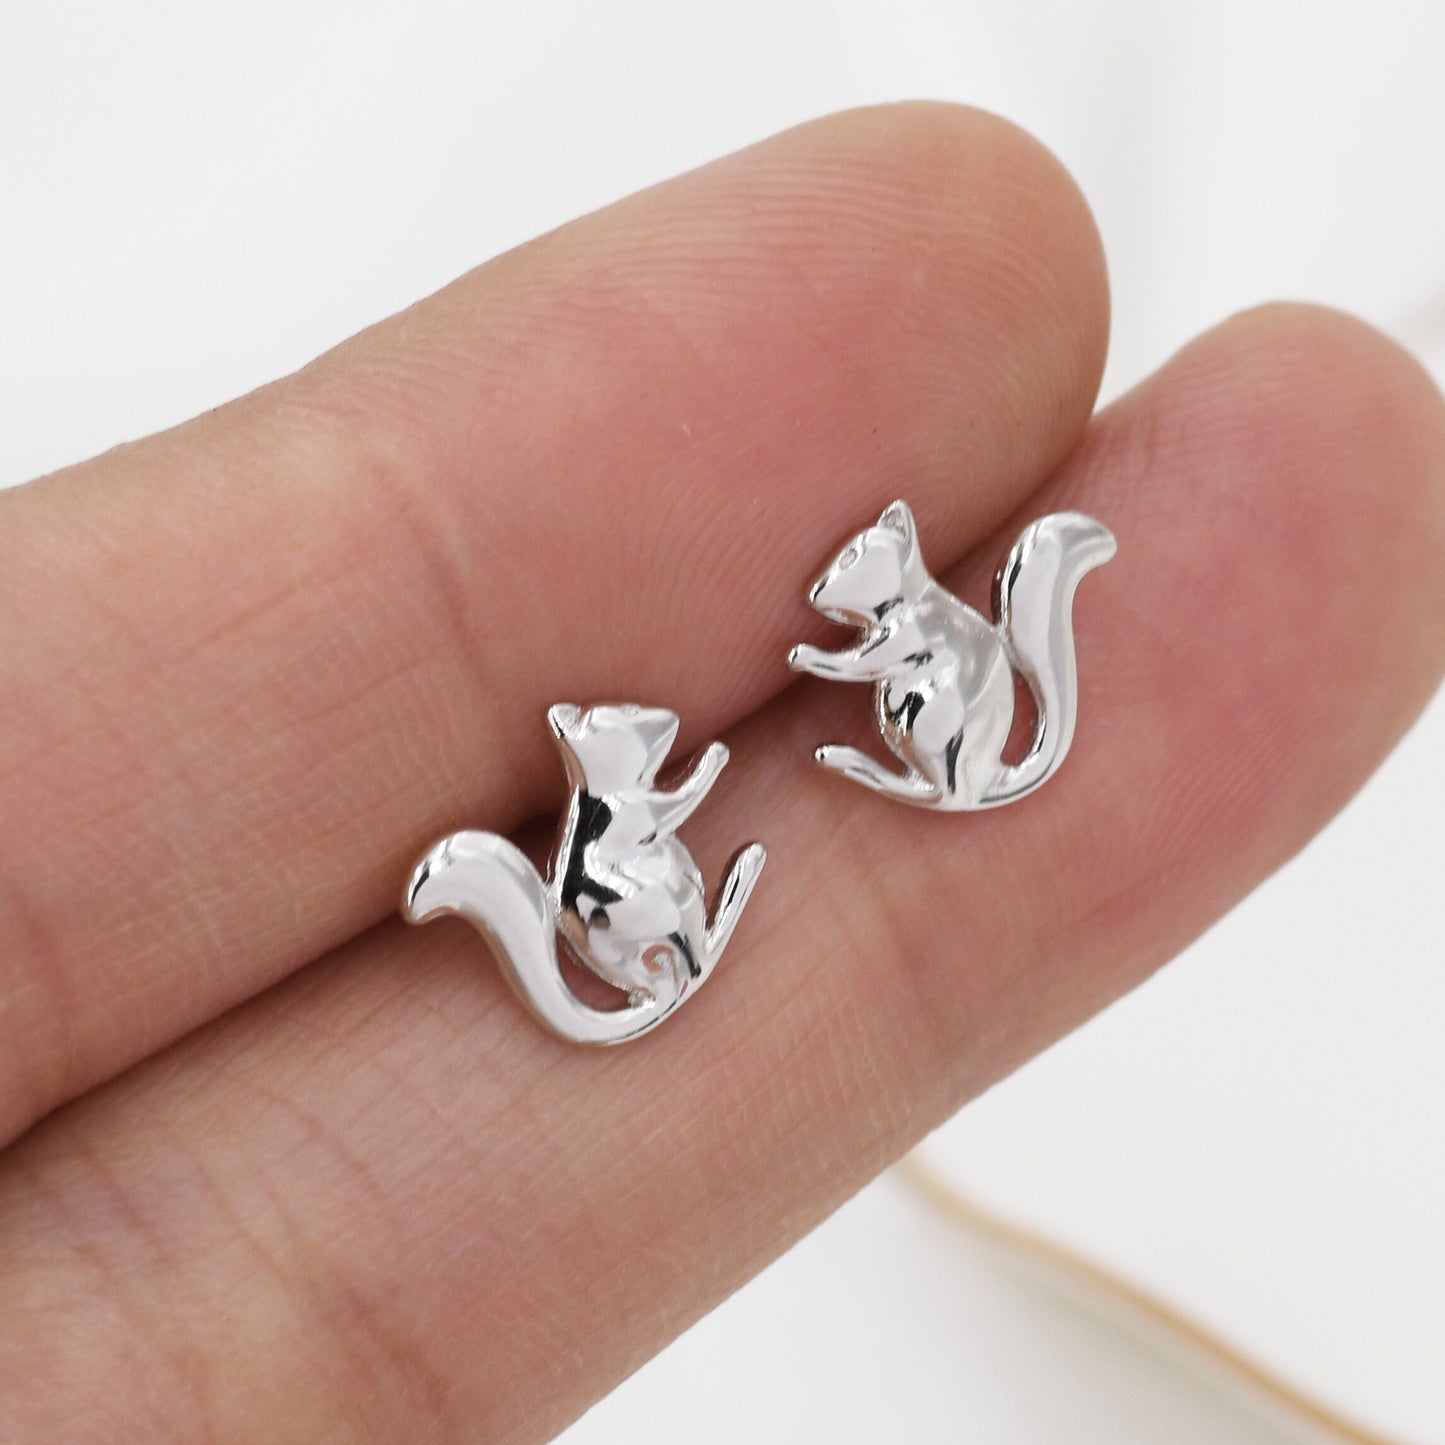 Squirrel Stud Earrings in Sterling Silver, Silver or Gold, Animal Earrings, Nature Inspired